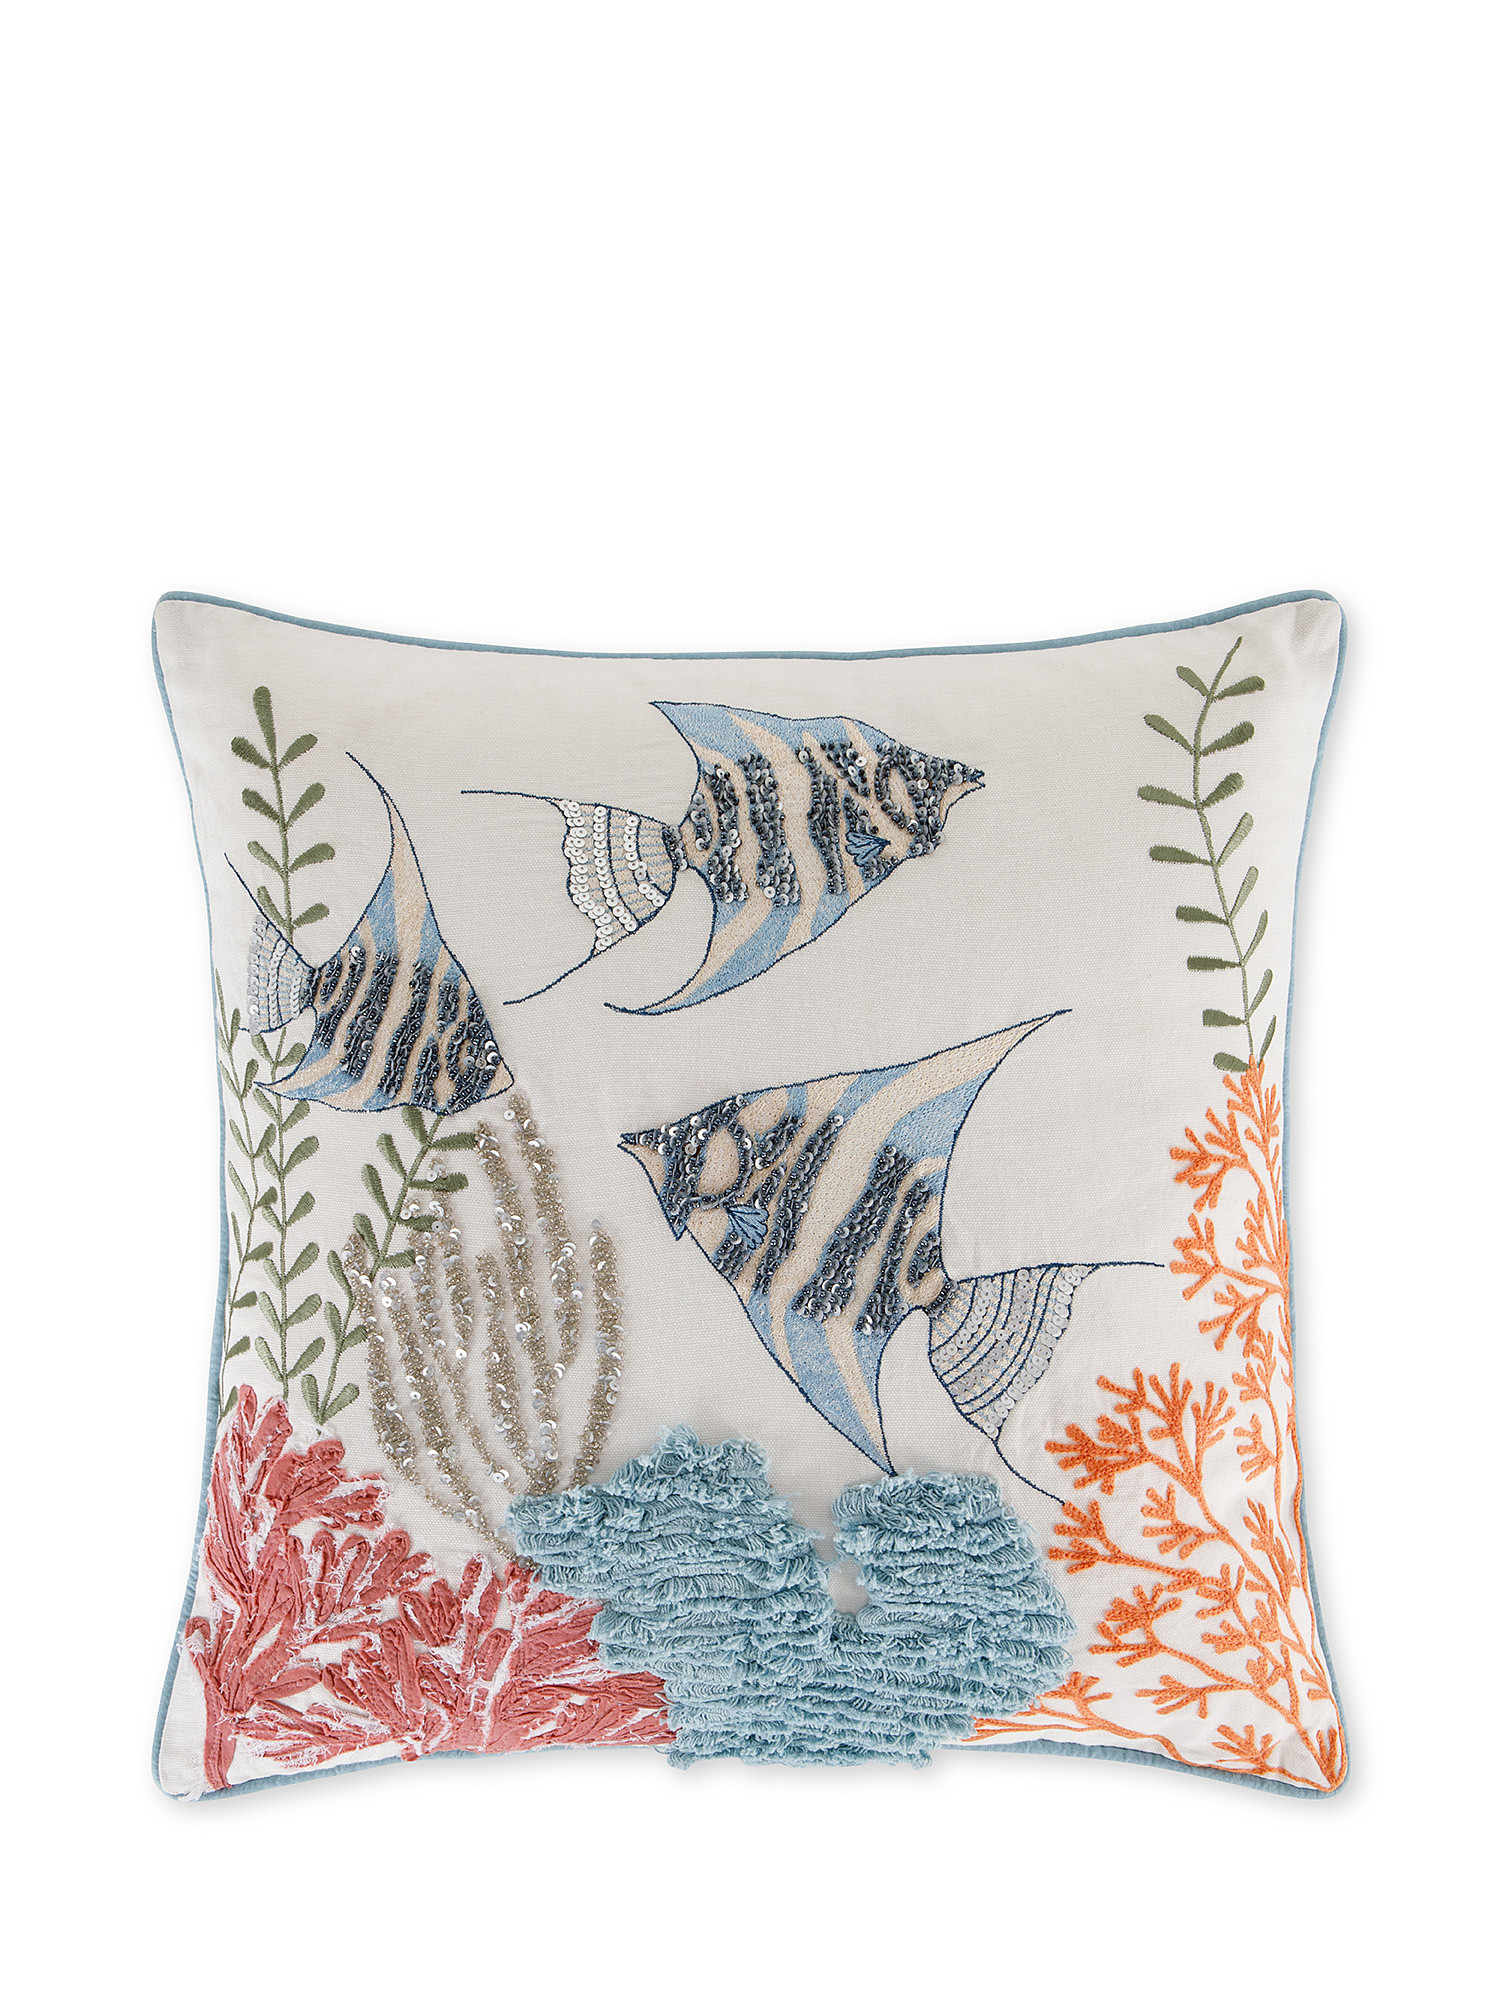 Fish embroidery cushion 45x45cm, White, large image number 0